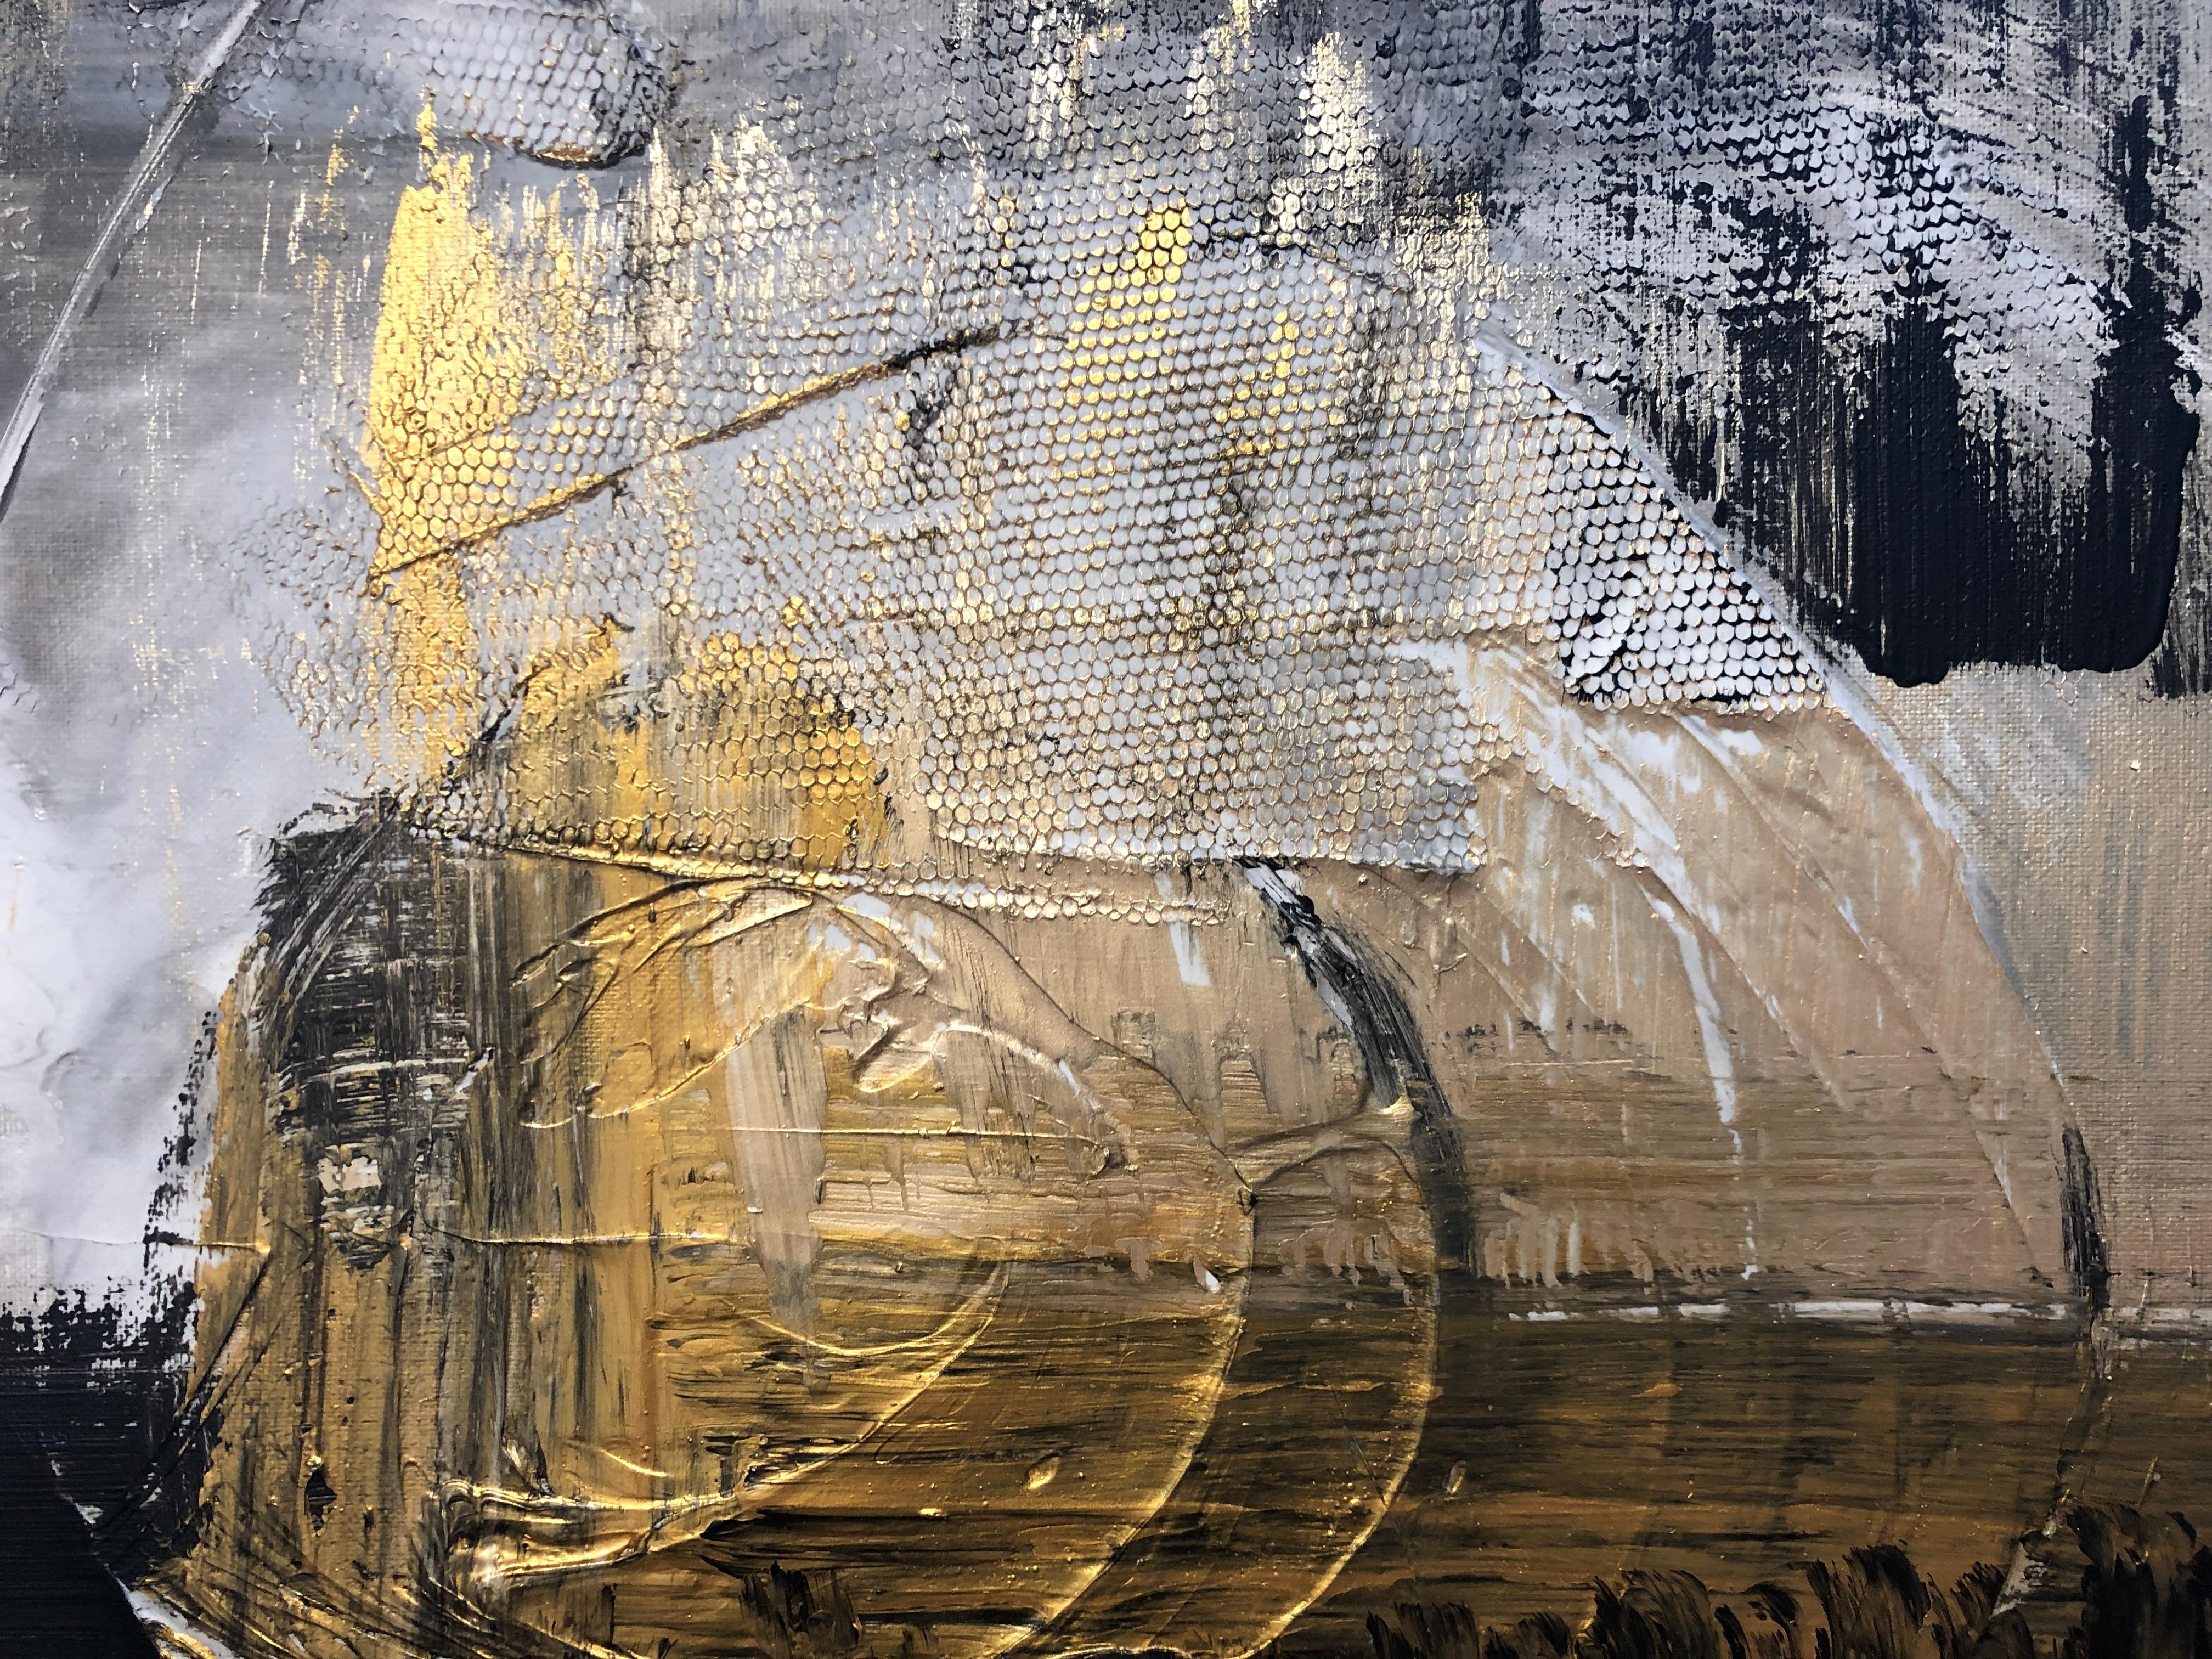 Gold Black Mixed Media on Canvas: Acrylic Stucco, Modeling Paste Heavy Texture  - Abstract Painting by Irena Orlov